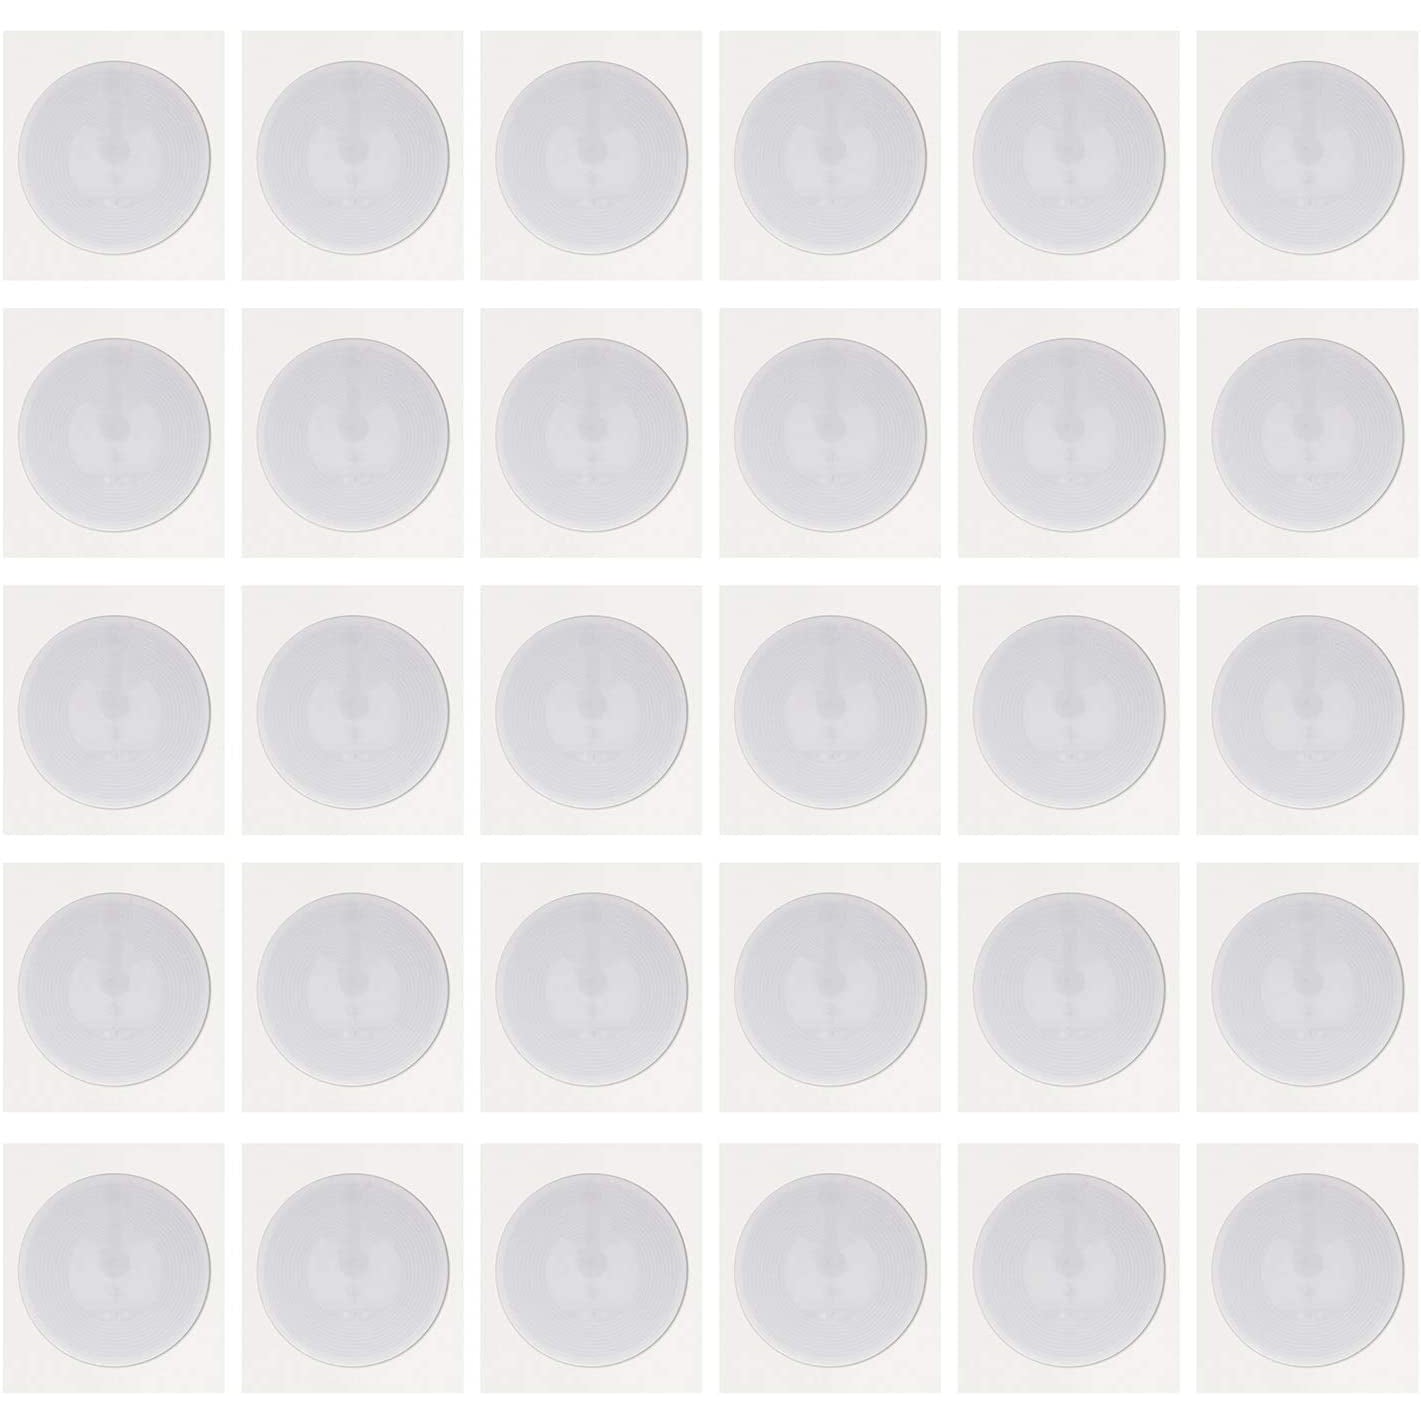 Gialer NTAG215 NFC Stickers Round 25mm(1 inch) Blank White NTAG 215 Tags Work Perfectly with TagMo Amiibo and All NFC-Enabled Cell Phones & Devices